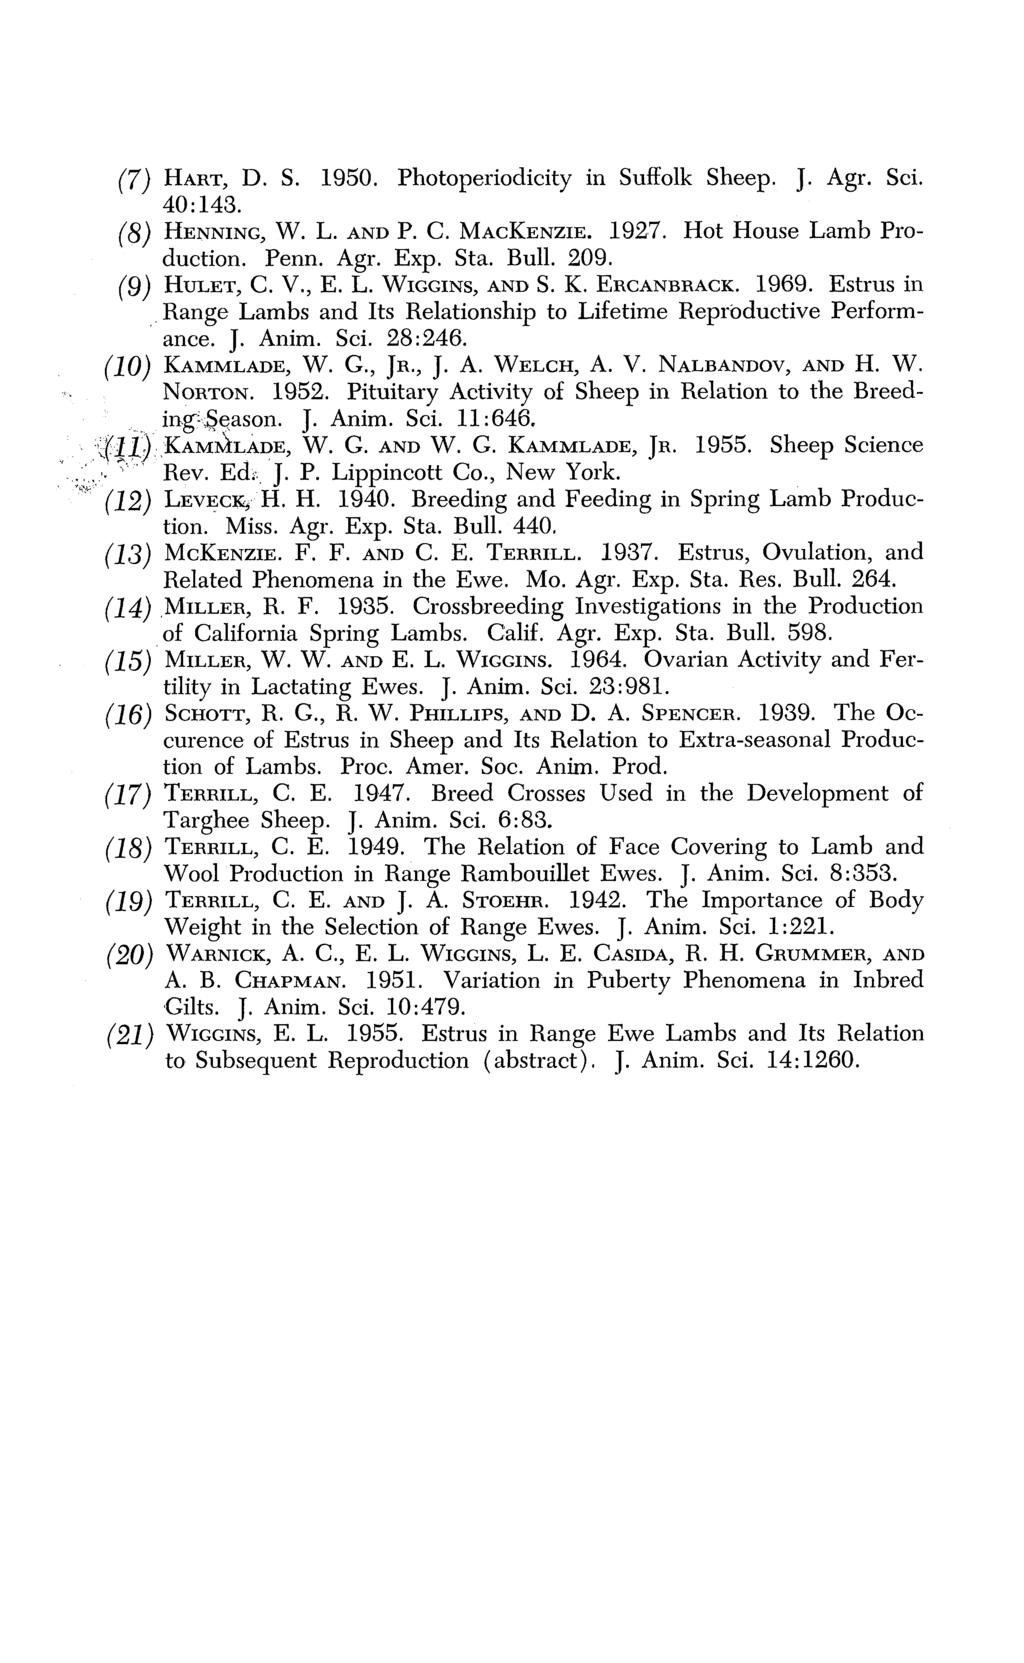 (7) HART, D. S. 1950. Photoperiodicity in Suffolk Sheep. J. Agr. Sci. 40:143. (8) HENNING, W. L. AND P. C. MACKENZIE. 1927. Hot House Lamb Production. Penn. Agr. Exp. Sta. Bull. 209. (9) HULET, C. V.